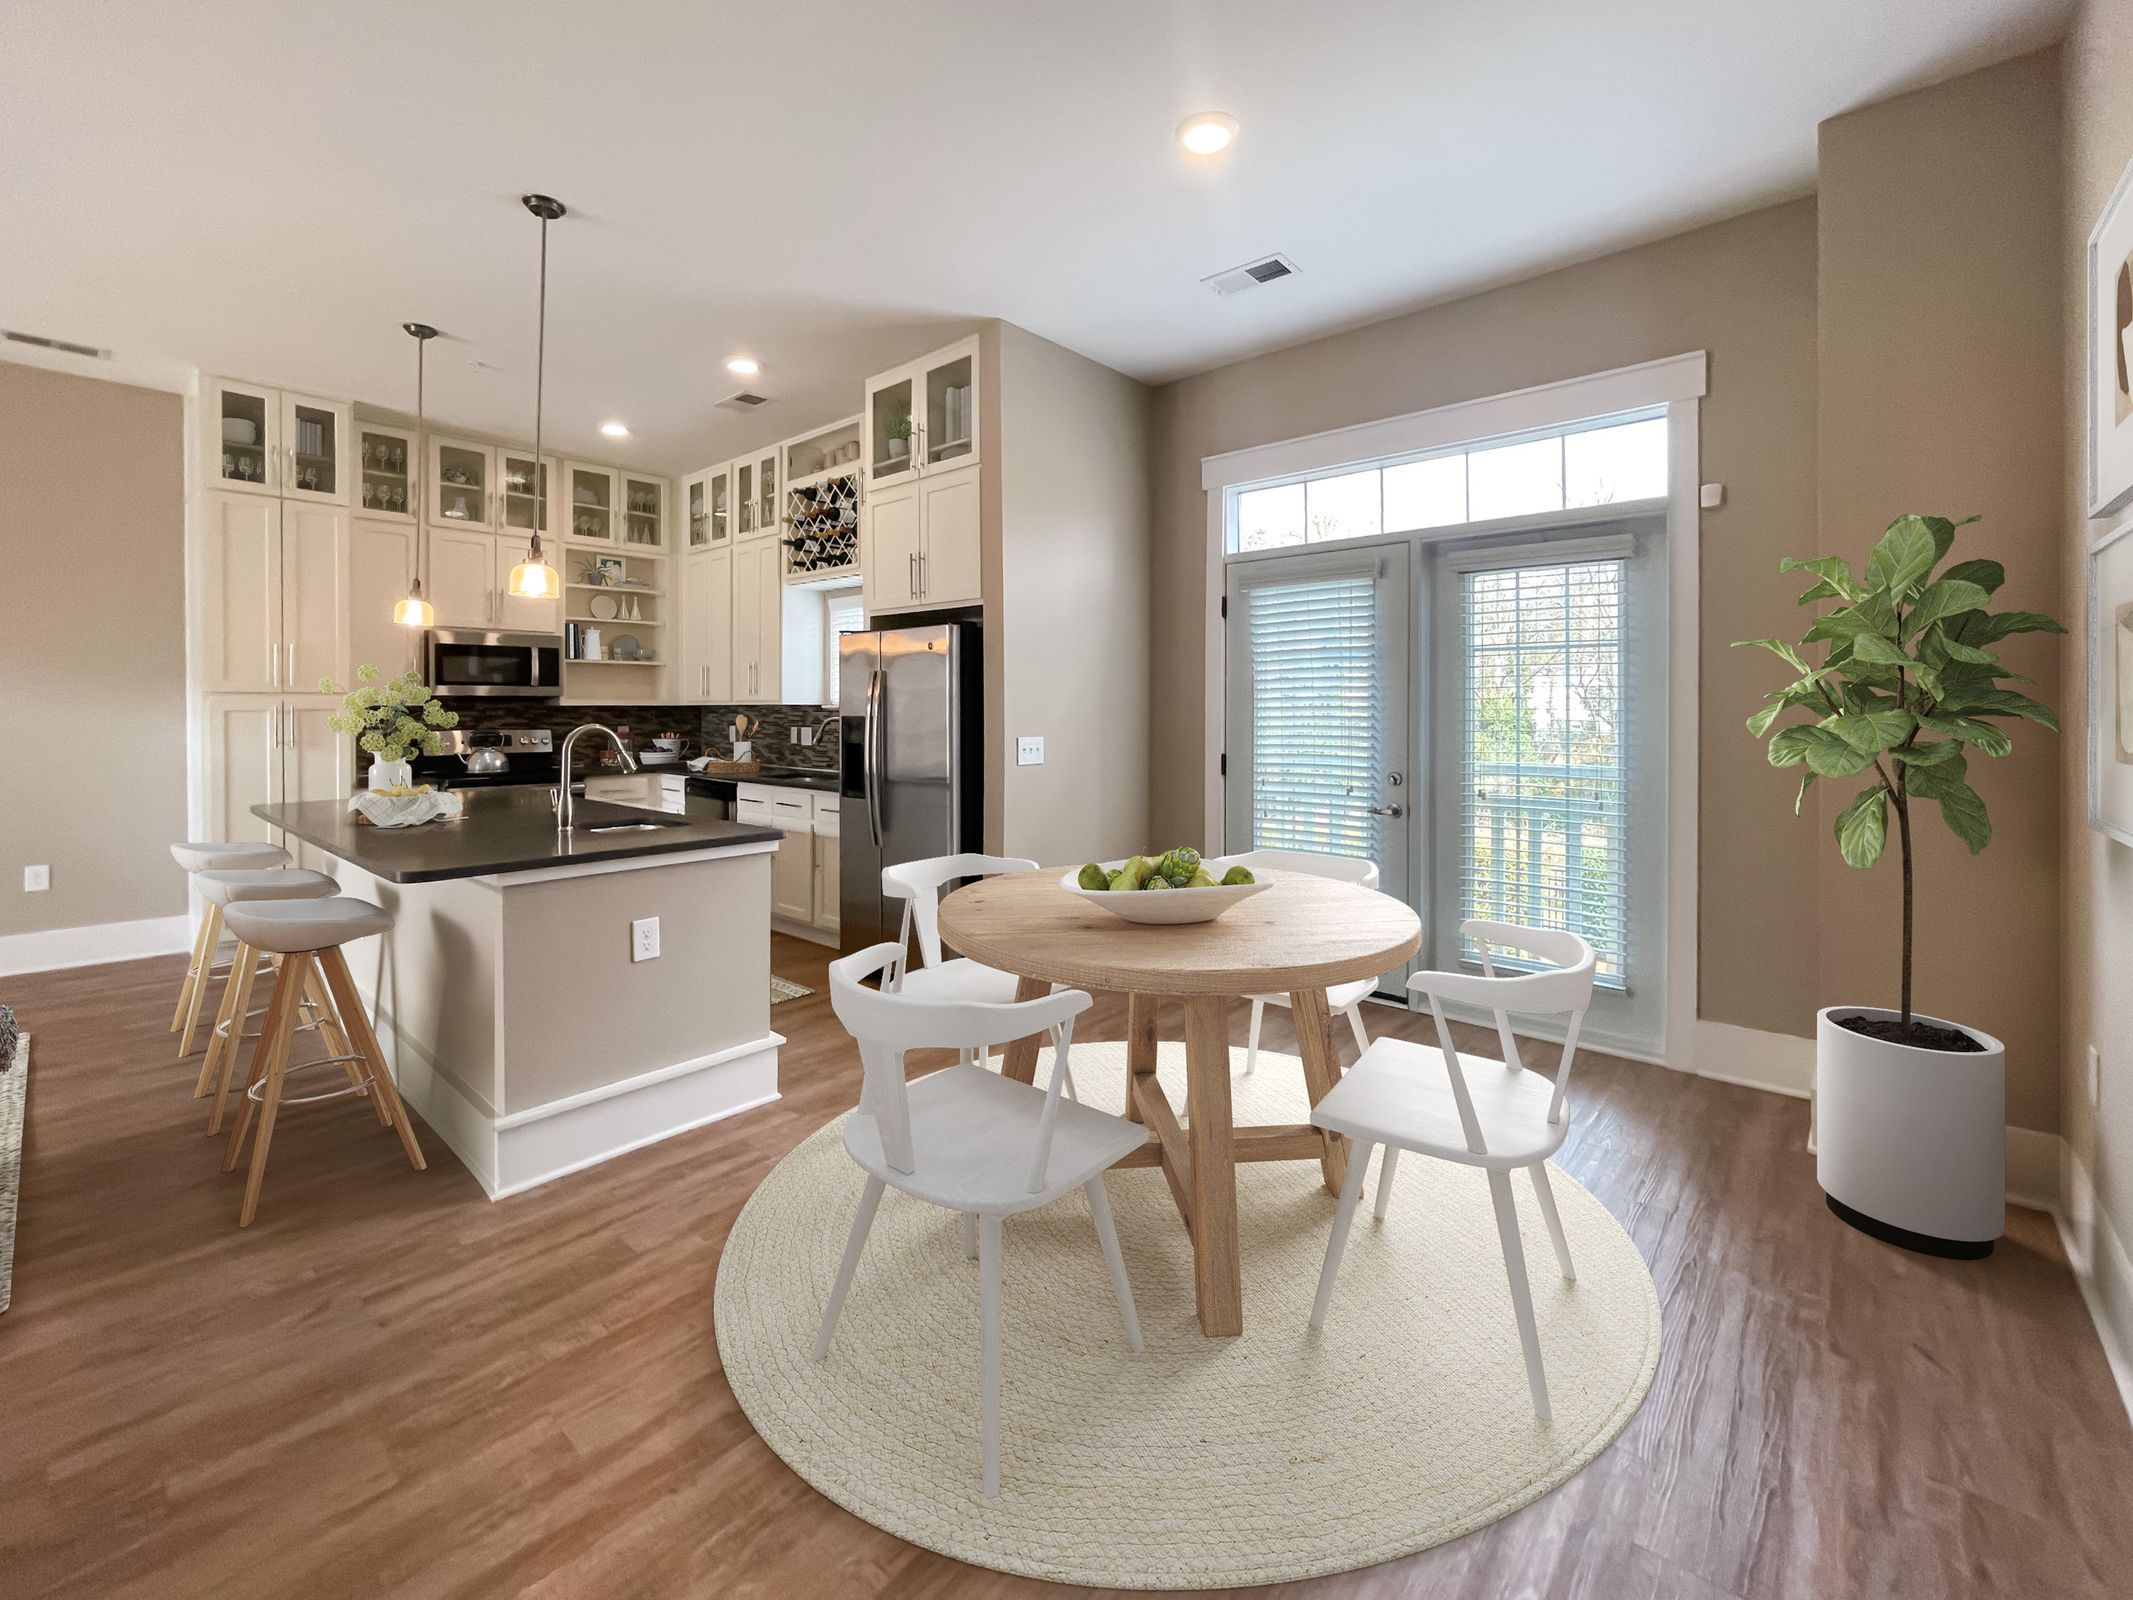 The Village at Commonwealth apartment dining room and kitchen area with modern farmhouse style furnishings